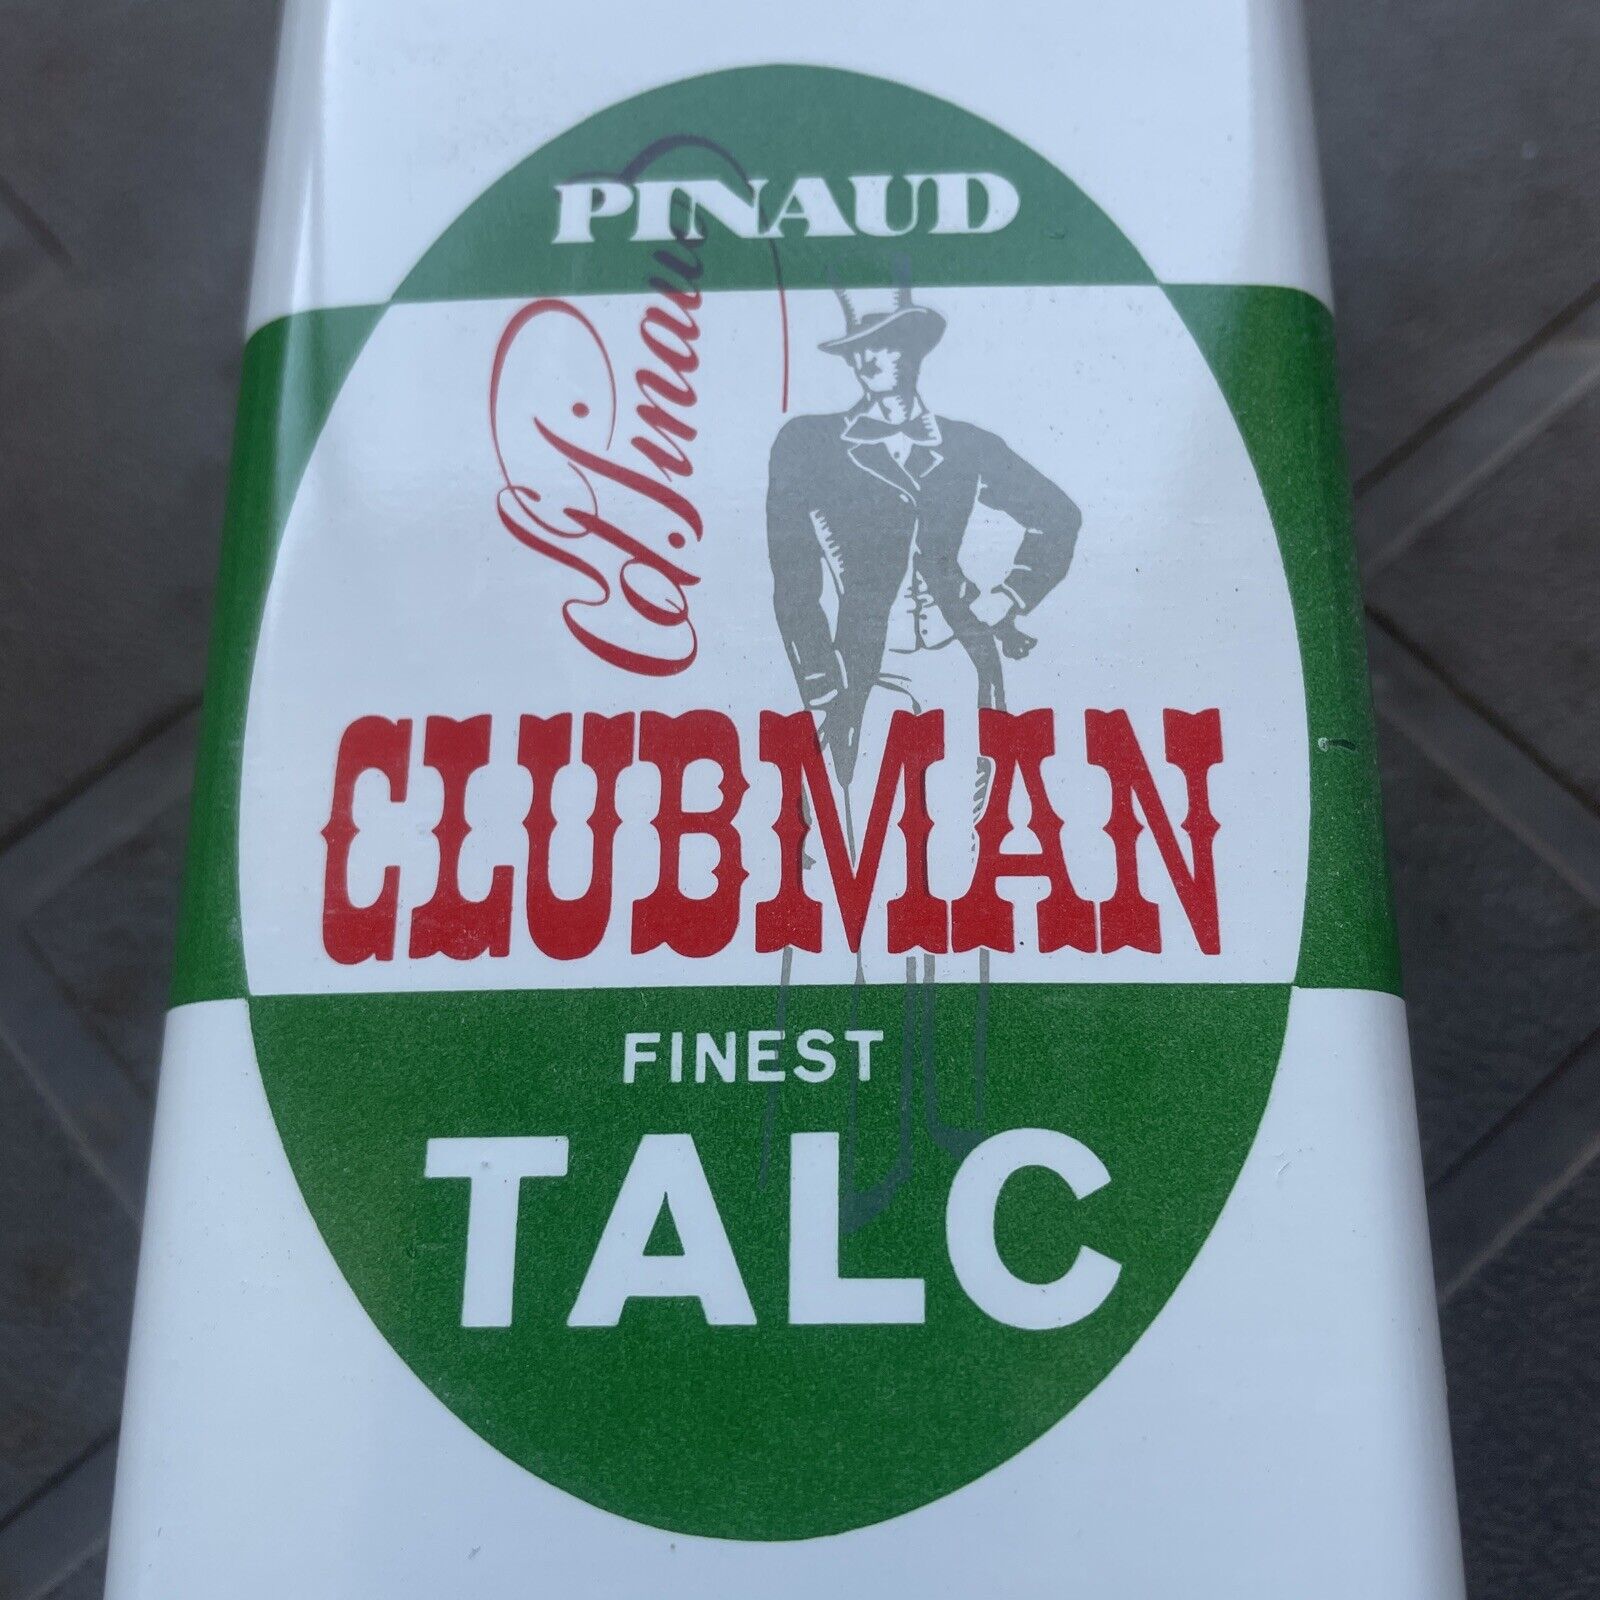 ONE - PINAUD clubman TALC 11 oz. tin full product Collectible Advertising